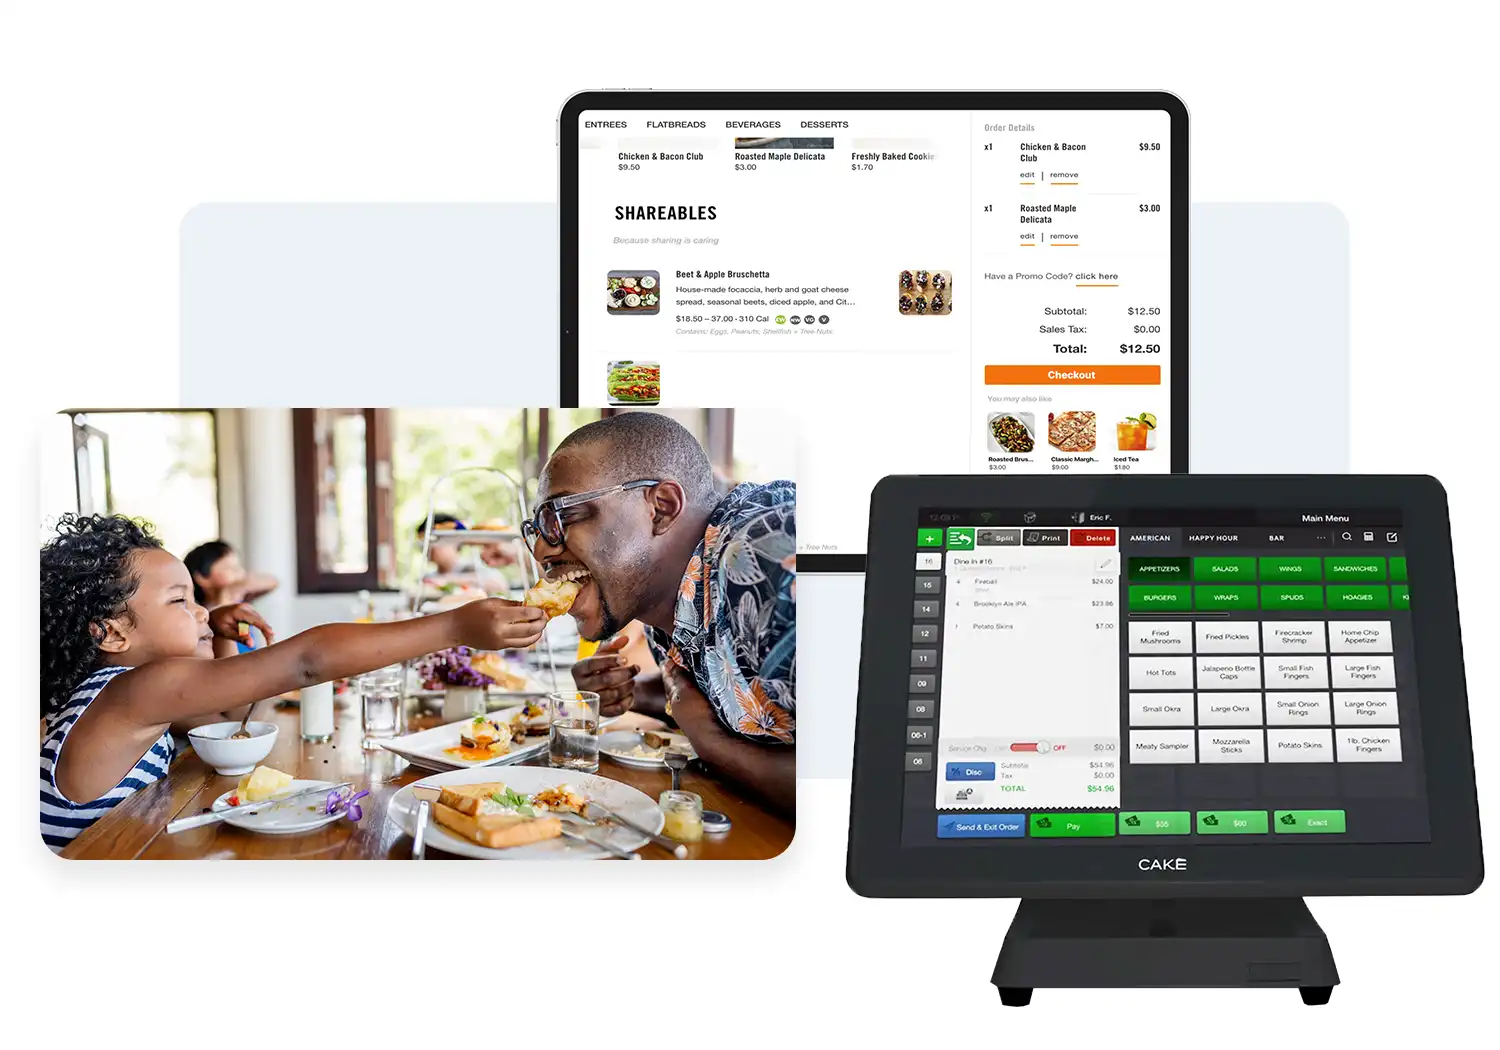 Mad Mobile's CAKE All-in-one Point of Sale, including online ordering checkout screen and lifestyle image of father and daughter eating at table